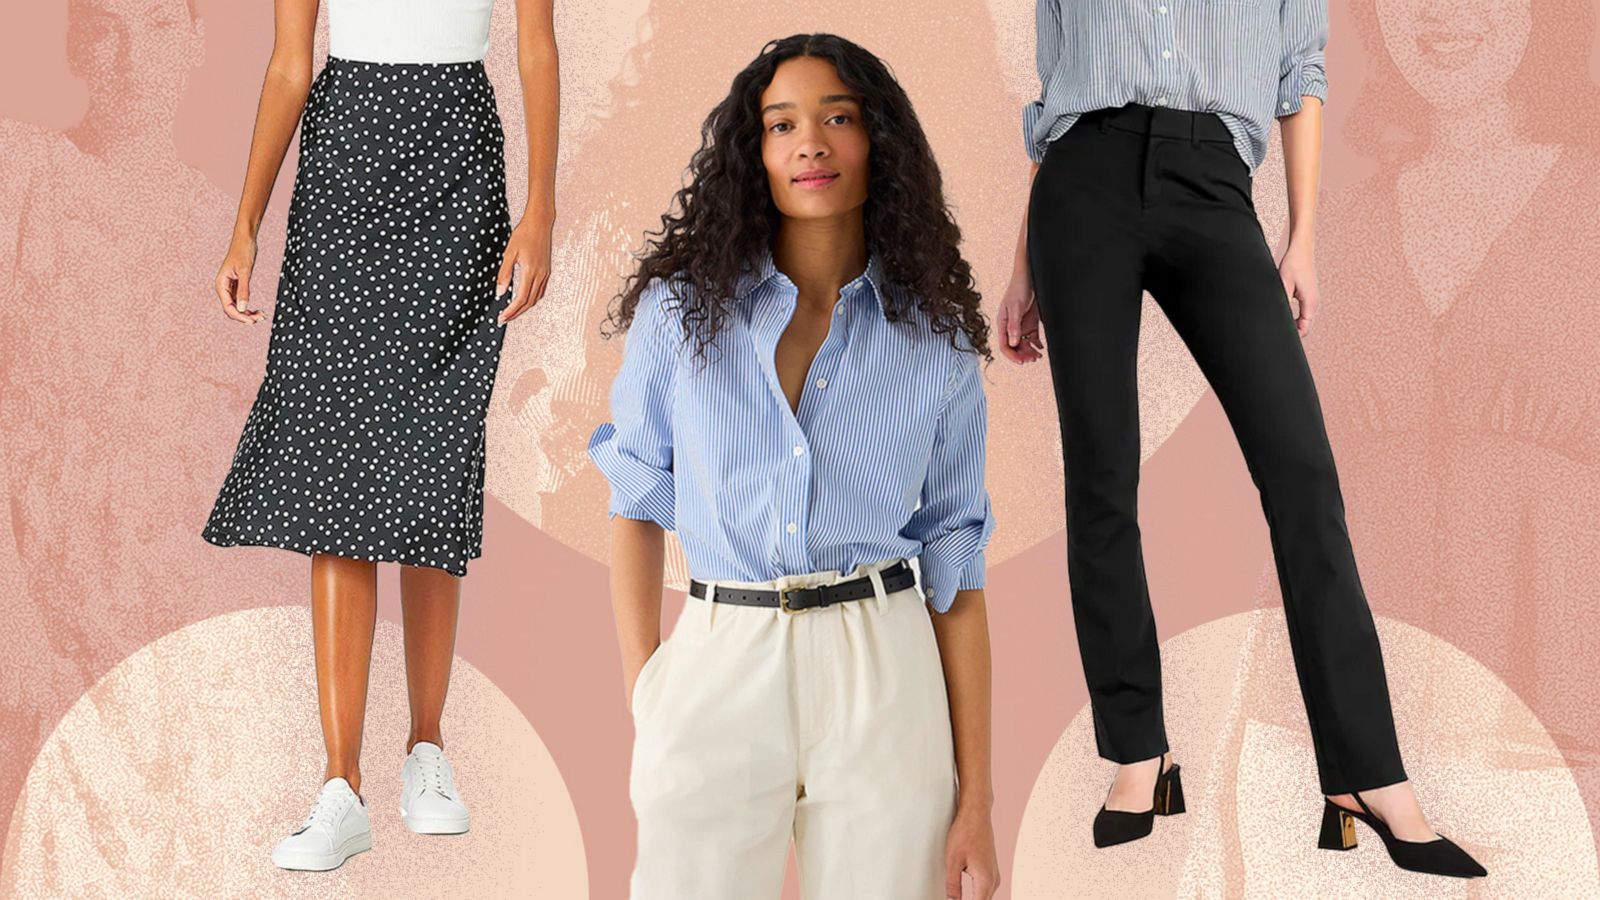 Shop blouses, skirts, pants and more workwear for women - Good Morning  America